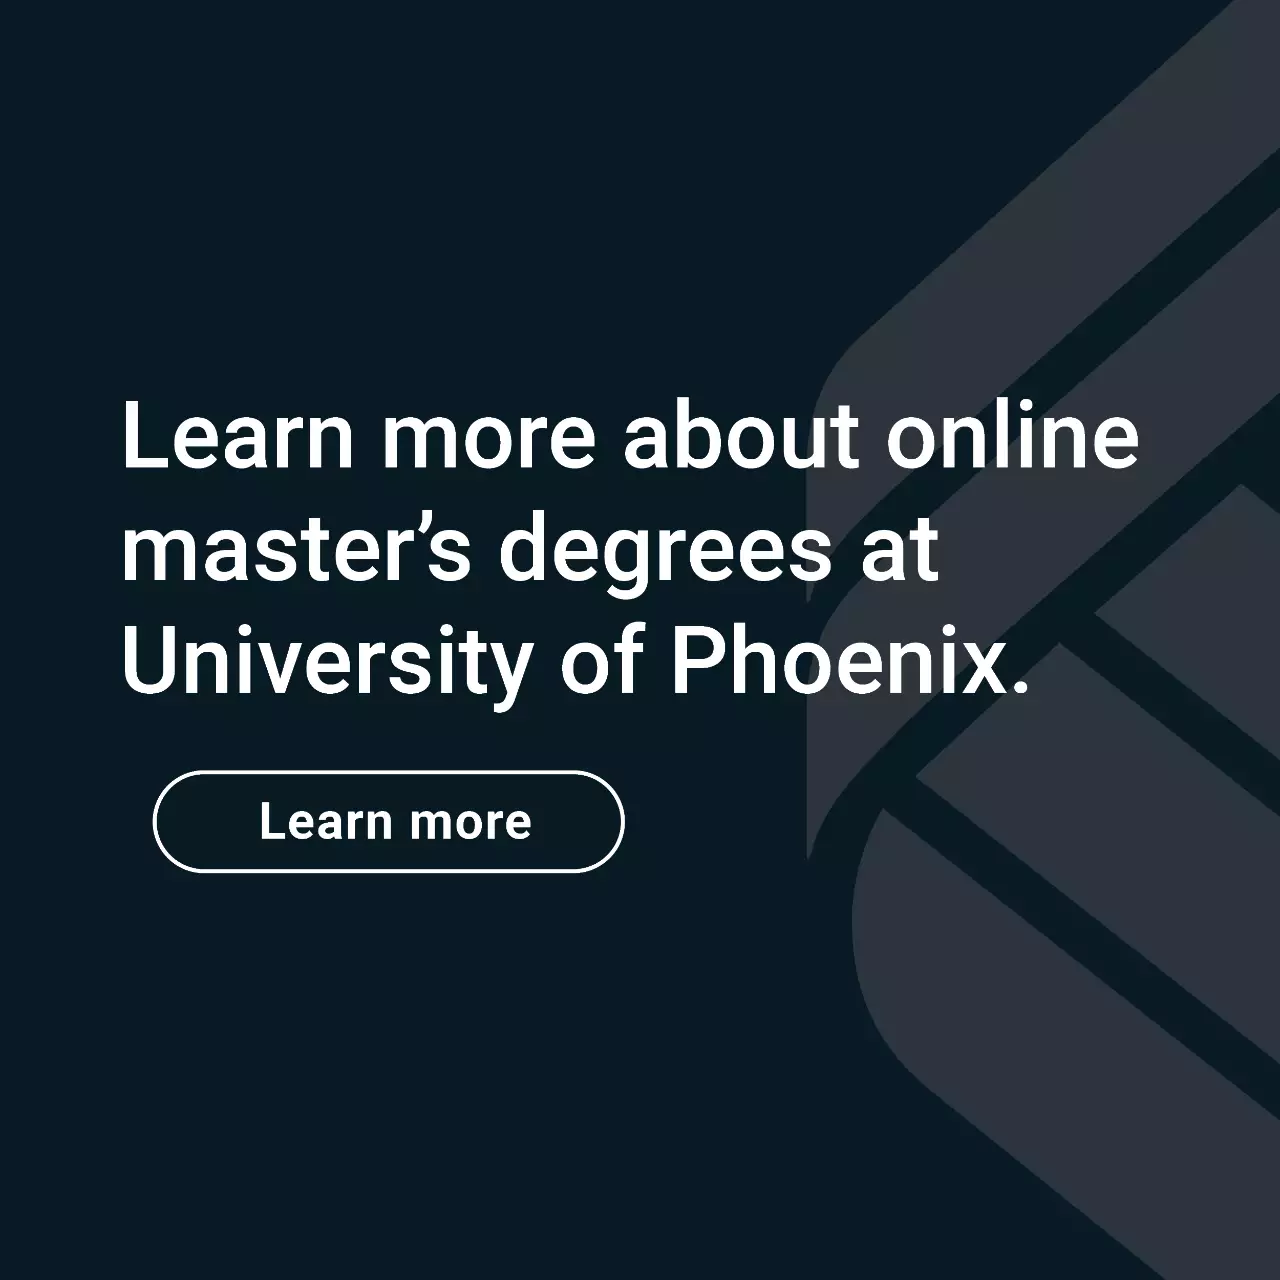 Learn more about online master's degrees